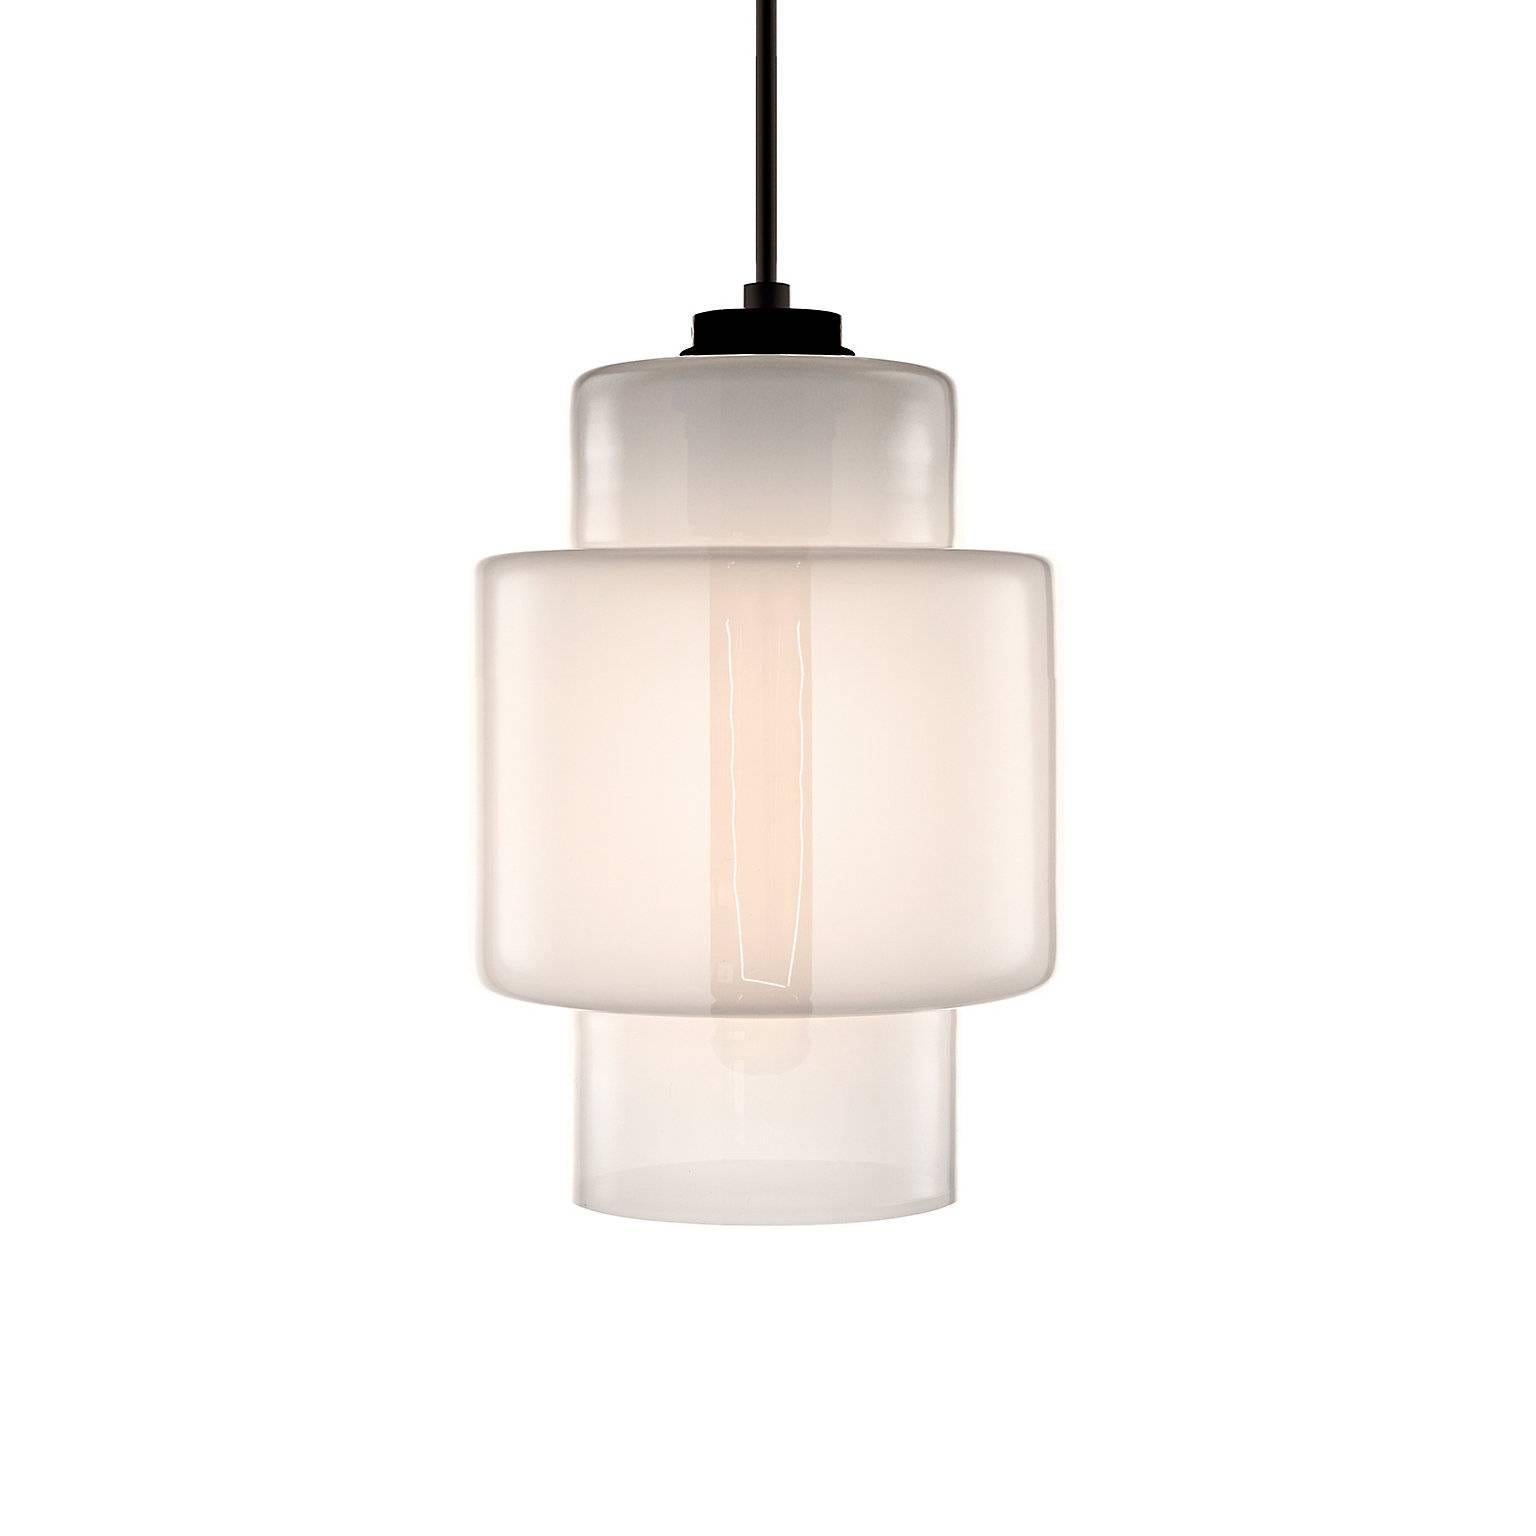 Axia Condesa Handblown Modern Glass Pendant Light, Made in the USA In New Condition For Sale In Beacon, NY